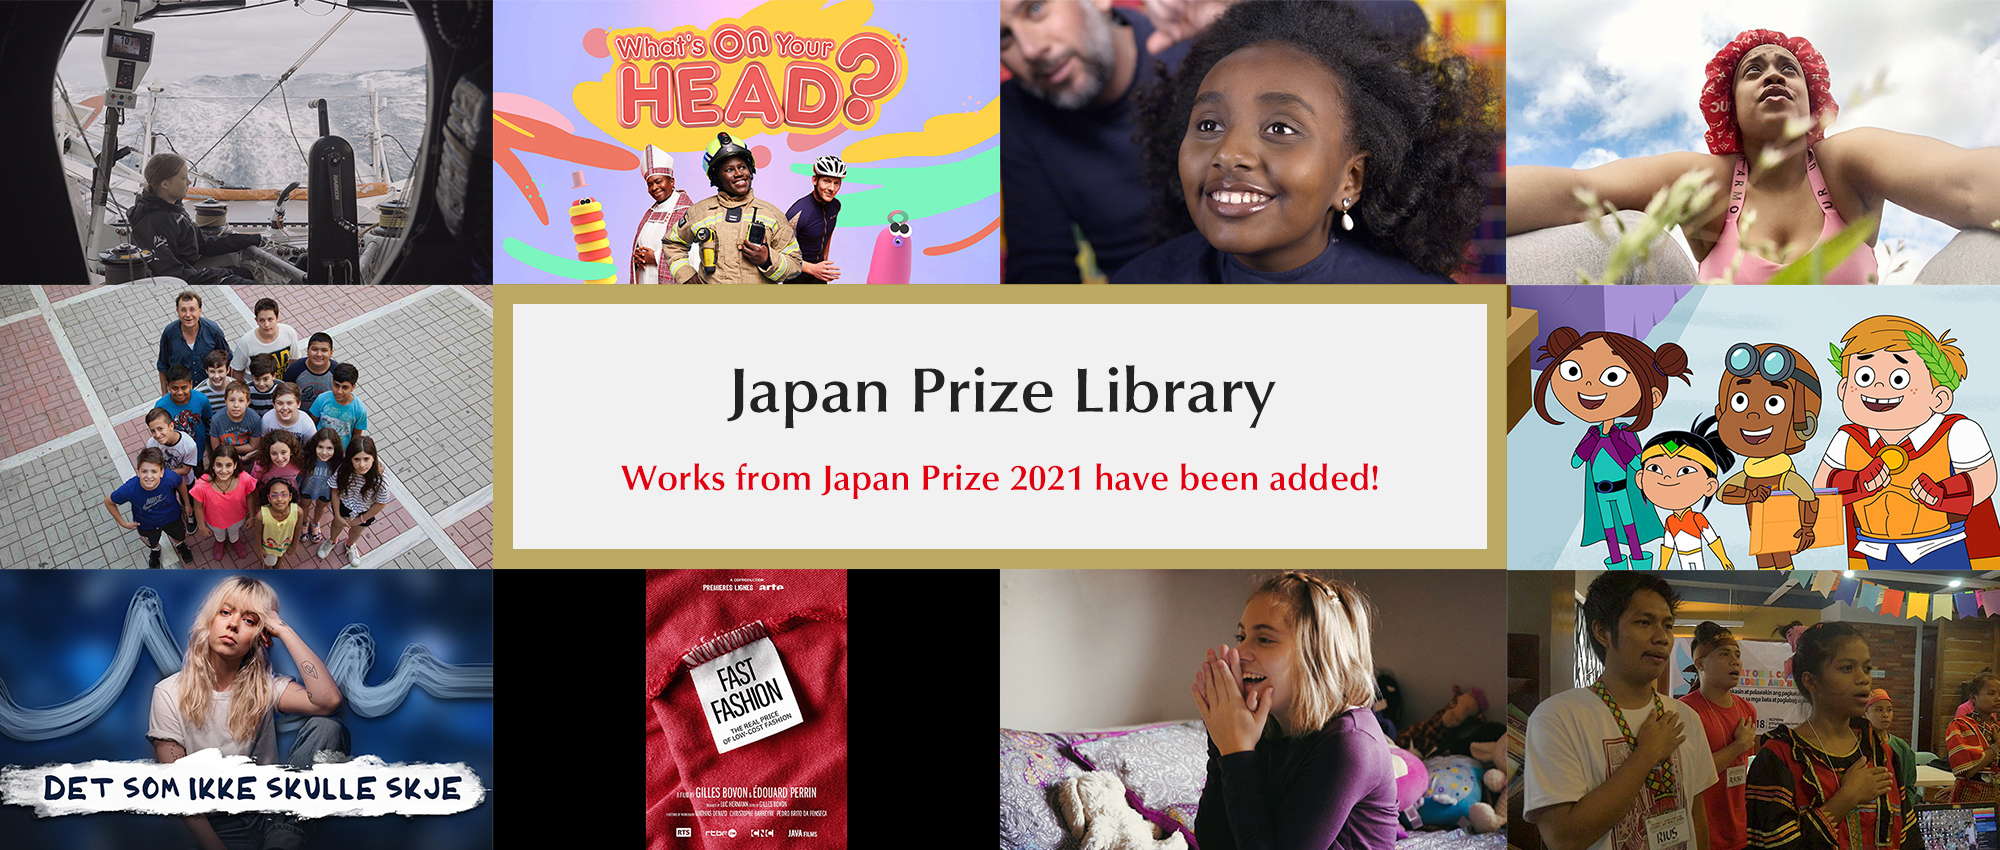 Japan Prize 2021 Library”